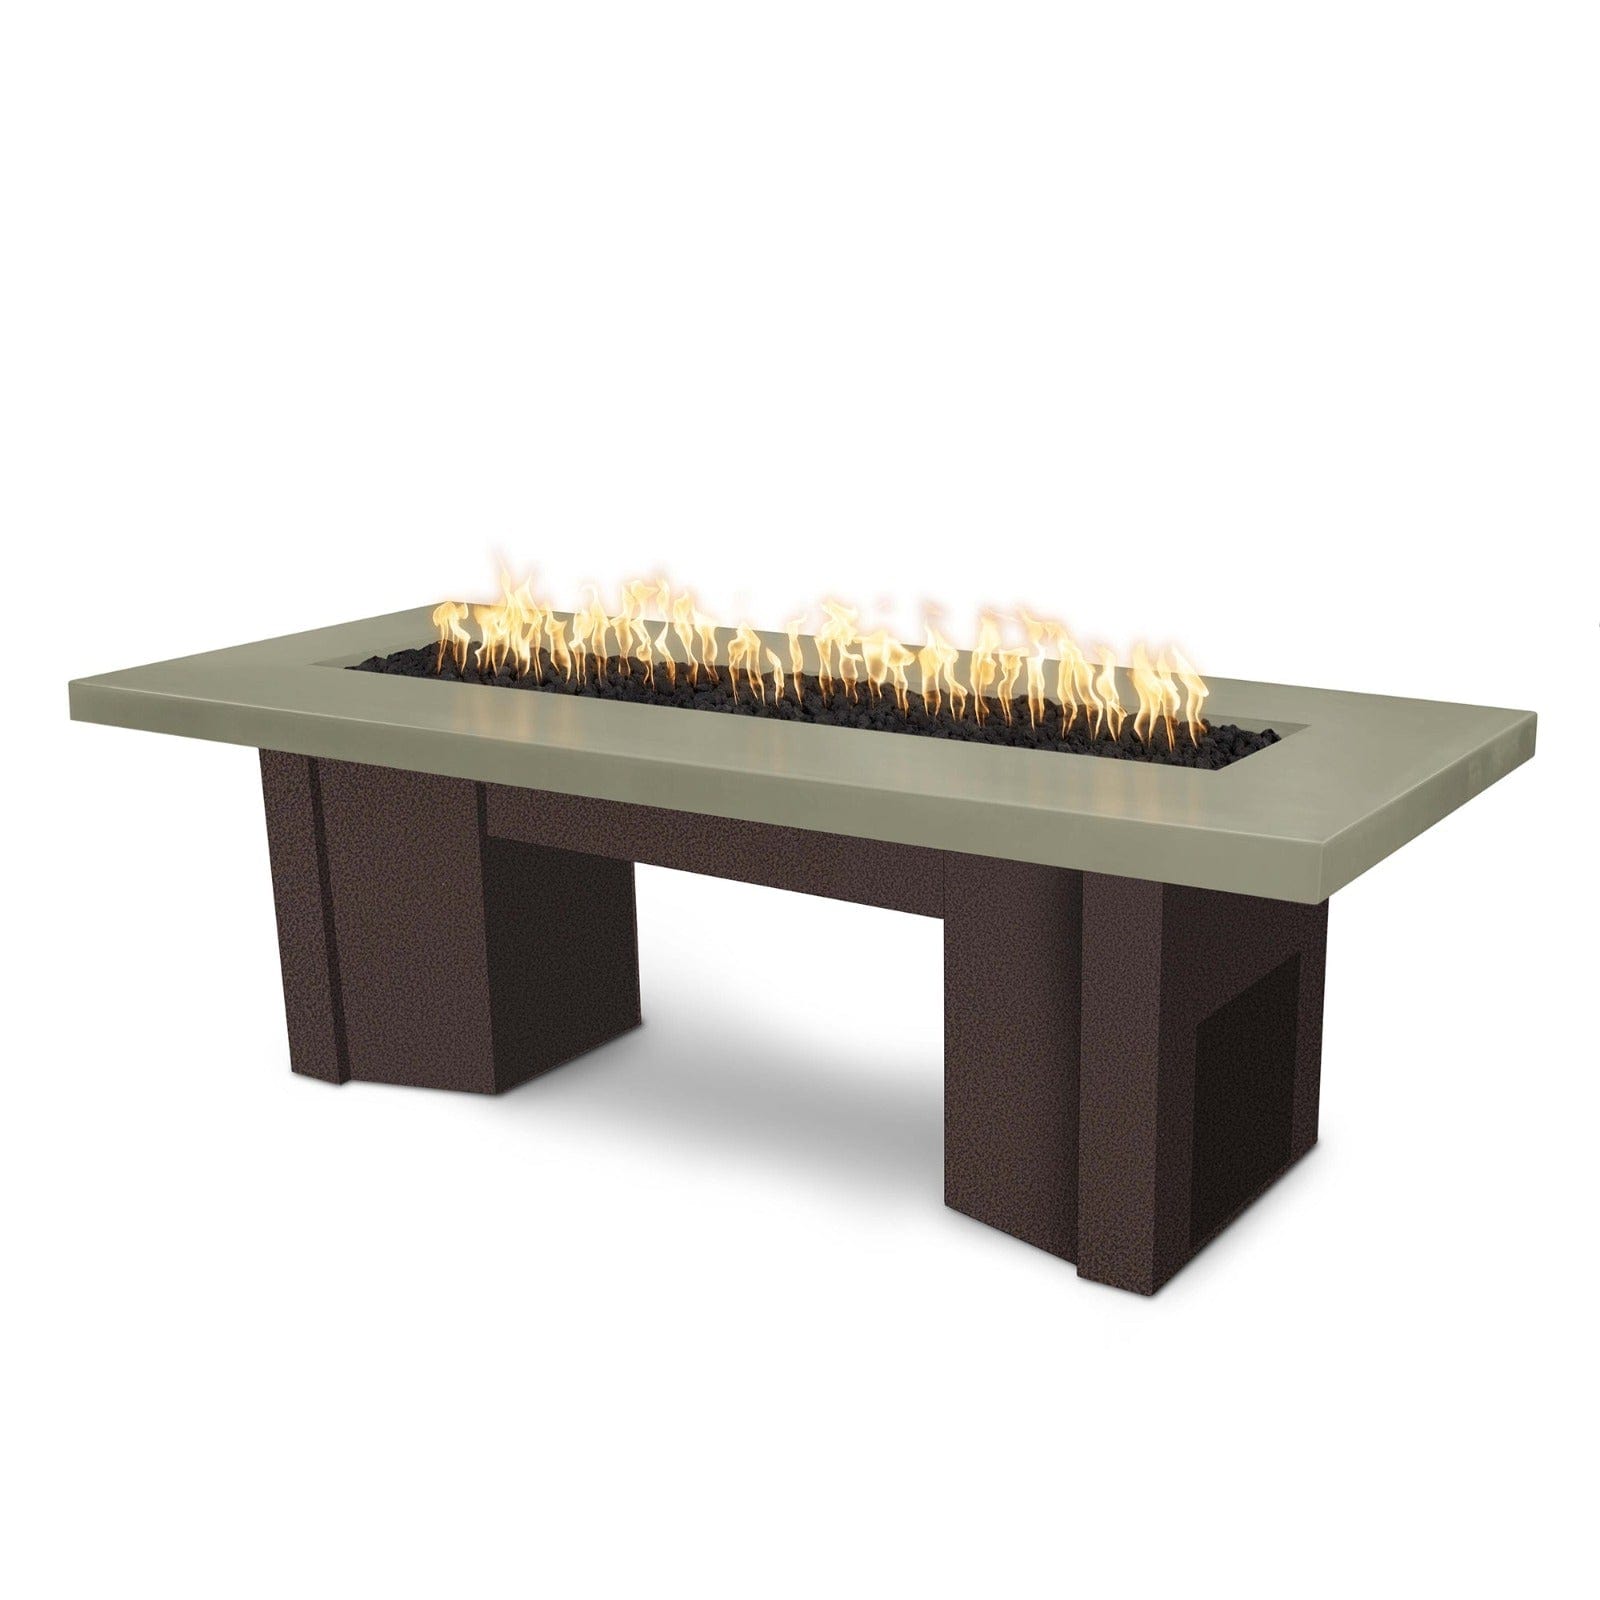 The Outdoor Plus Fire Features Ash (-ASH) / Copper Vein Powder Coated Steel (-CPV) The Outdoor Plus 78" Alameda Fire Table Smooth Concrete in Natural Gas - 110V Plug & Play Electronic Ignition / OPT-ALMGFRC78EKIT-NG